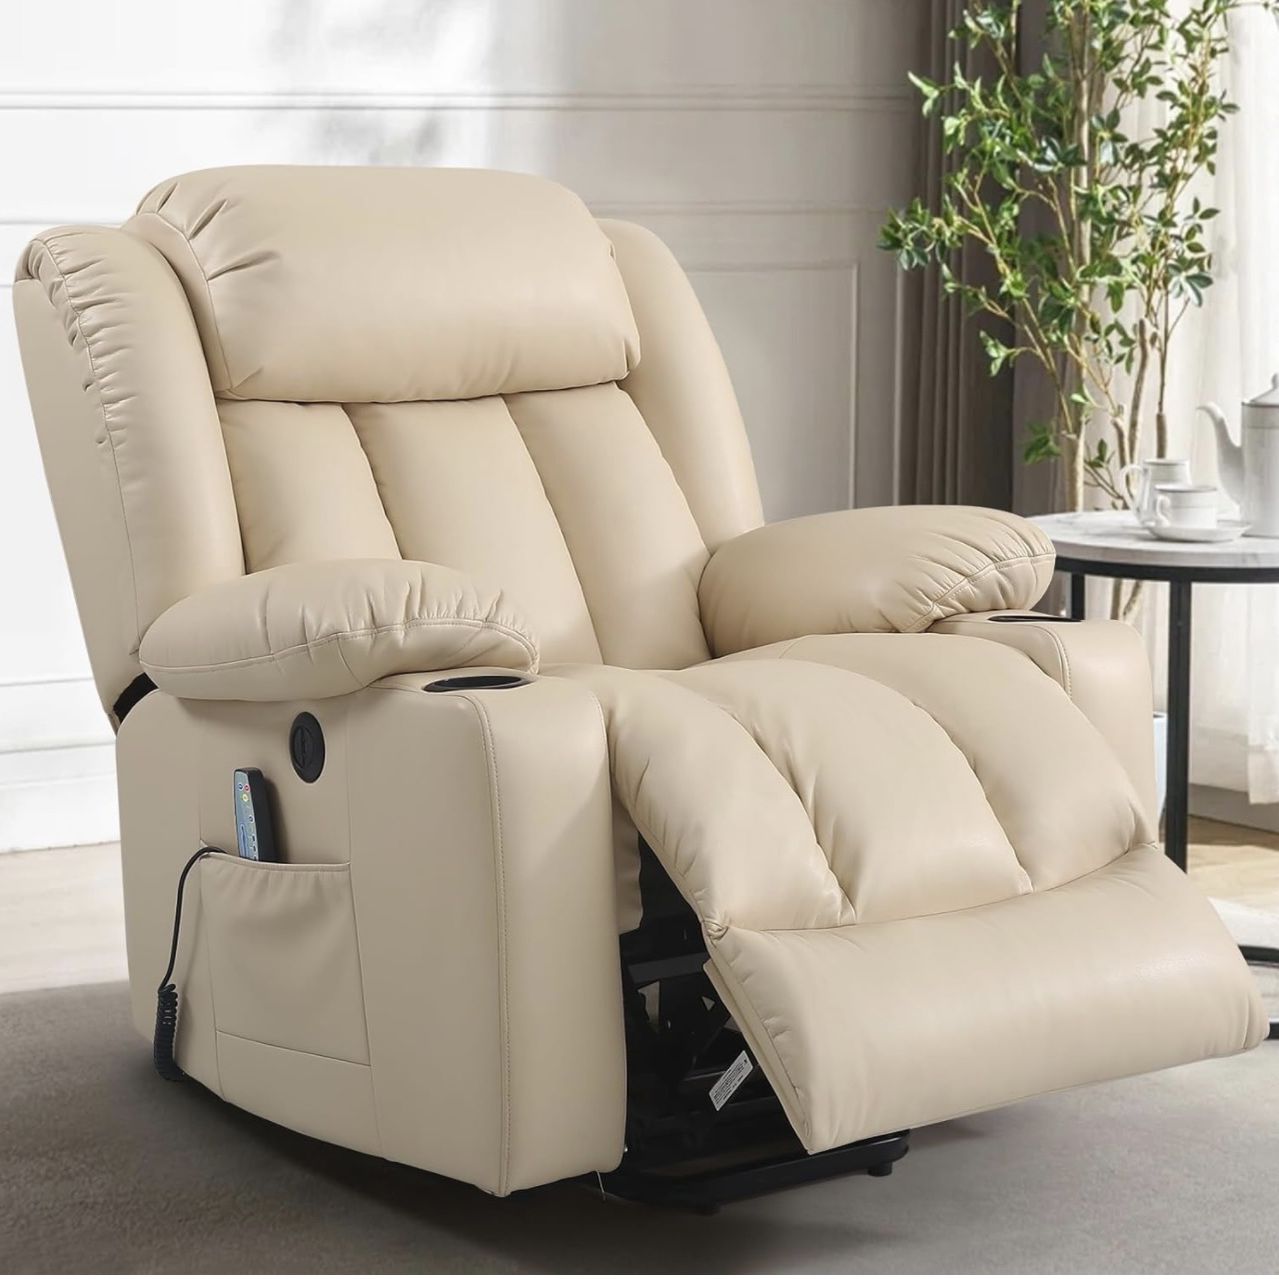 Large Power Lift Recliner Chair with Massage and Heat for Elderly